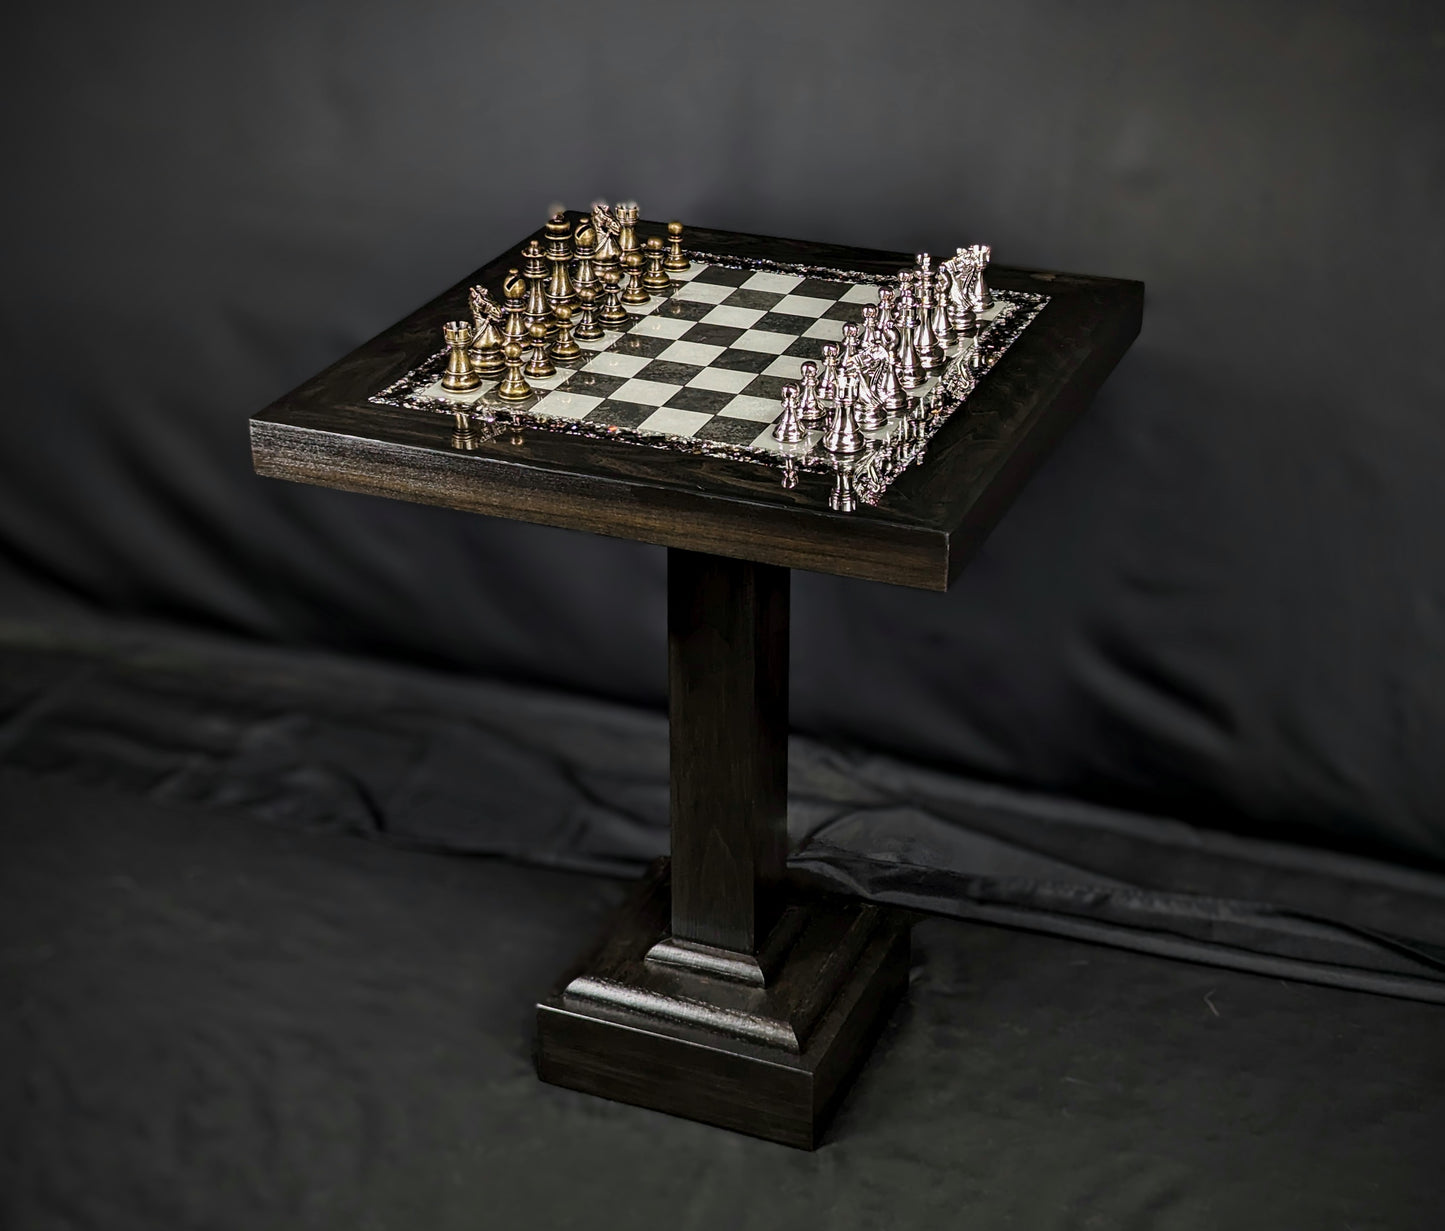 "The Rook" (Black) Chess Table